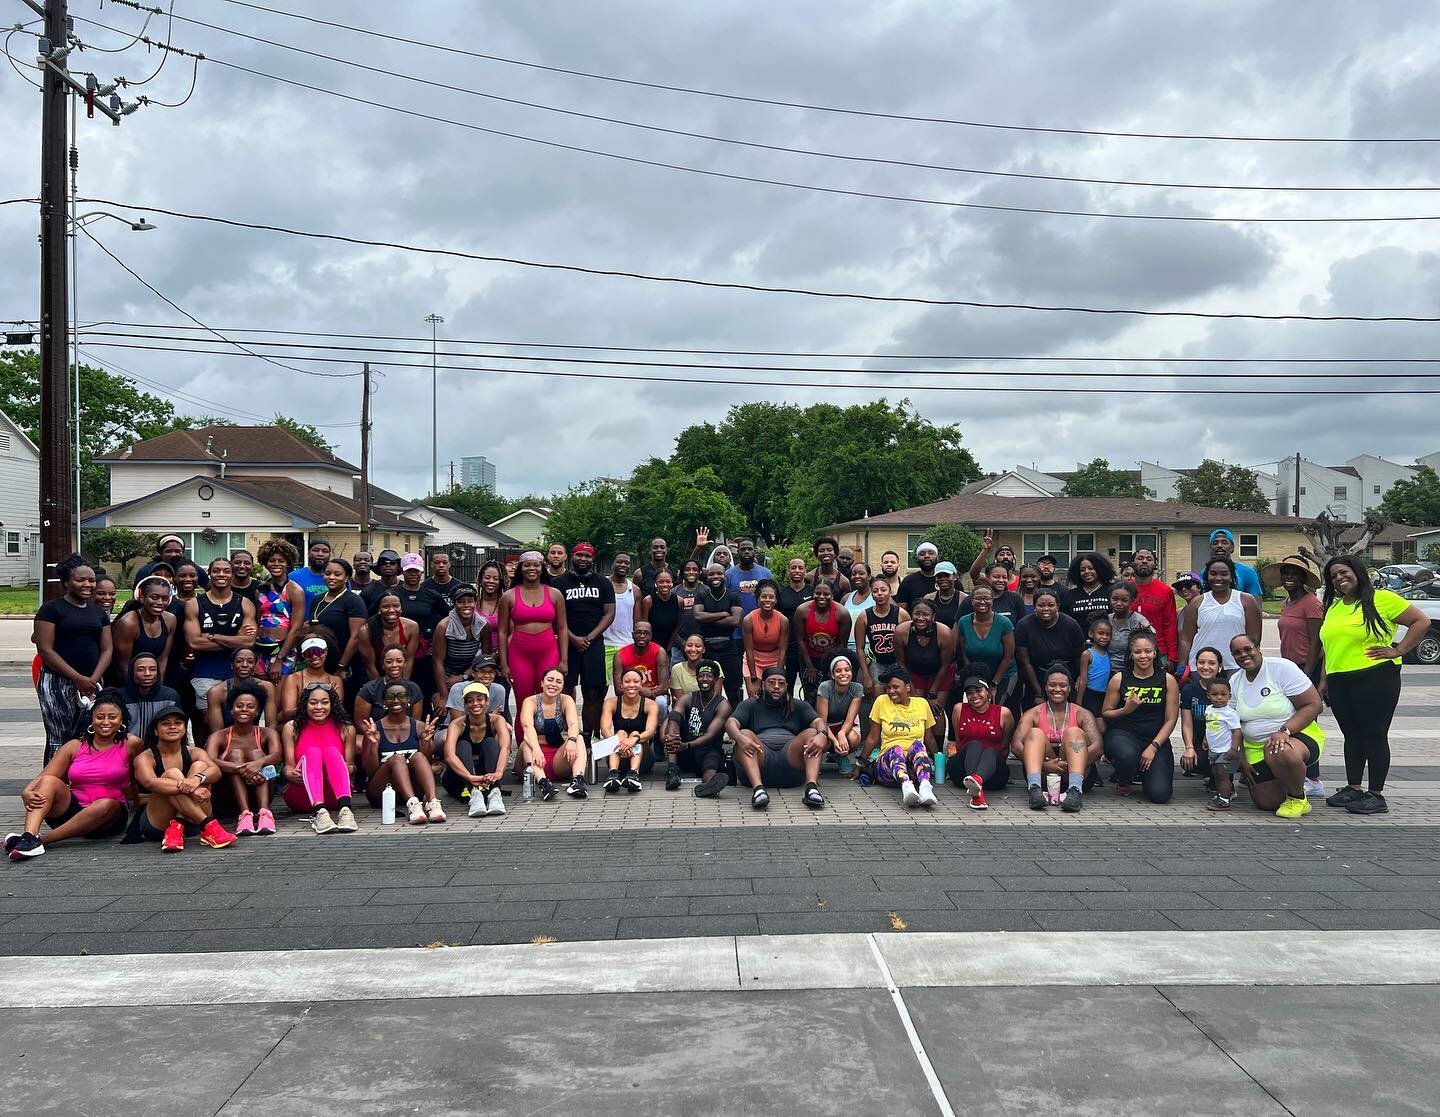 ZFT Made You Look!! 👀

The Zquad took over 3rd Ward/Eado and put in some great work on this humid Saturday! No obstacle is too big to stop the ZFT train&hellip;&hellip;.WE COMING!! 🚂 
.
.
#ZFTRunClub #WhatDemMilesDo #Belong #Zquad #EmancipationPark